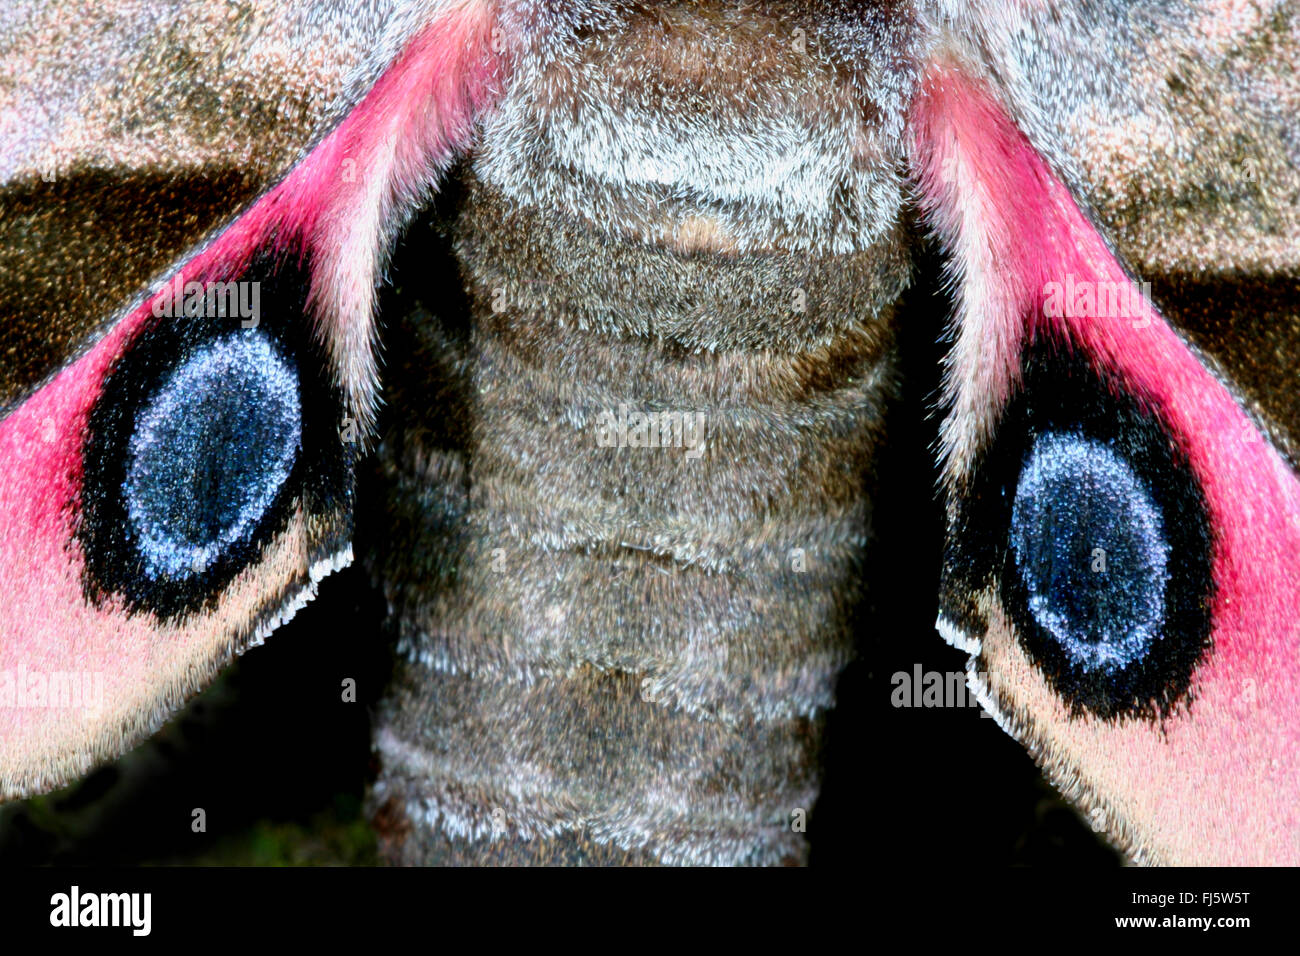 Eyed Hawk-Moth, Eyed Hawkmoth, Hawkmoths Hawk-moths (Smerinthus ocellata, Smerinthus ocellatus), eye-spots on the hind wings, Germany Stock Photo